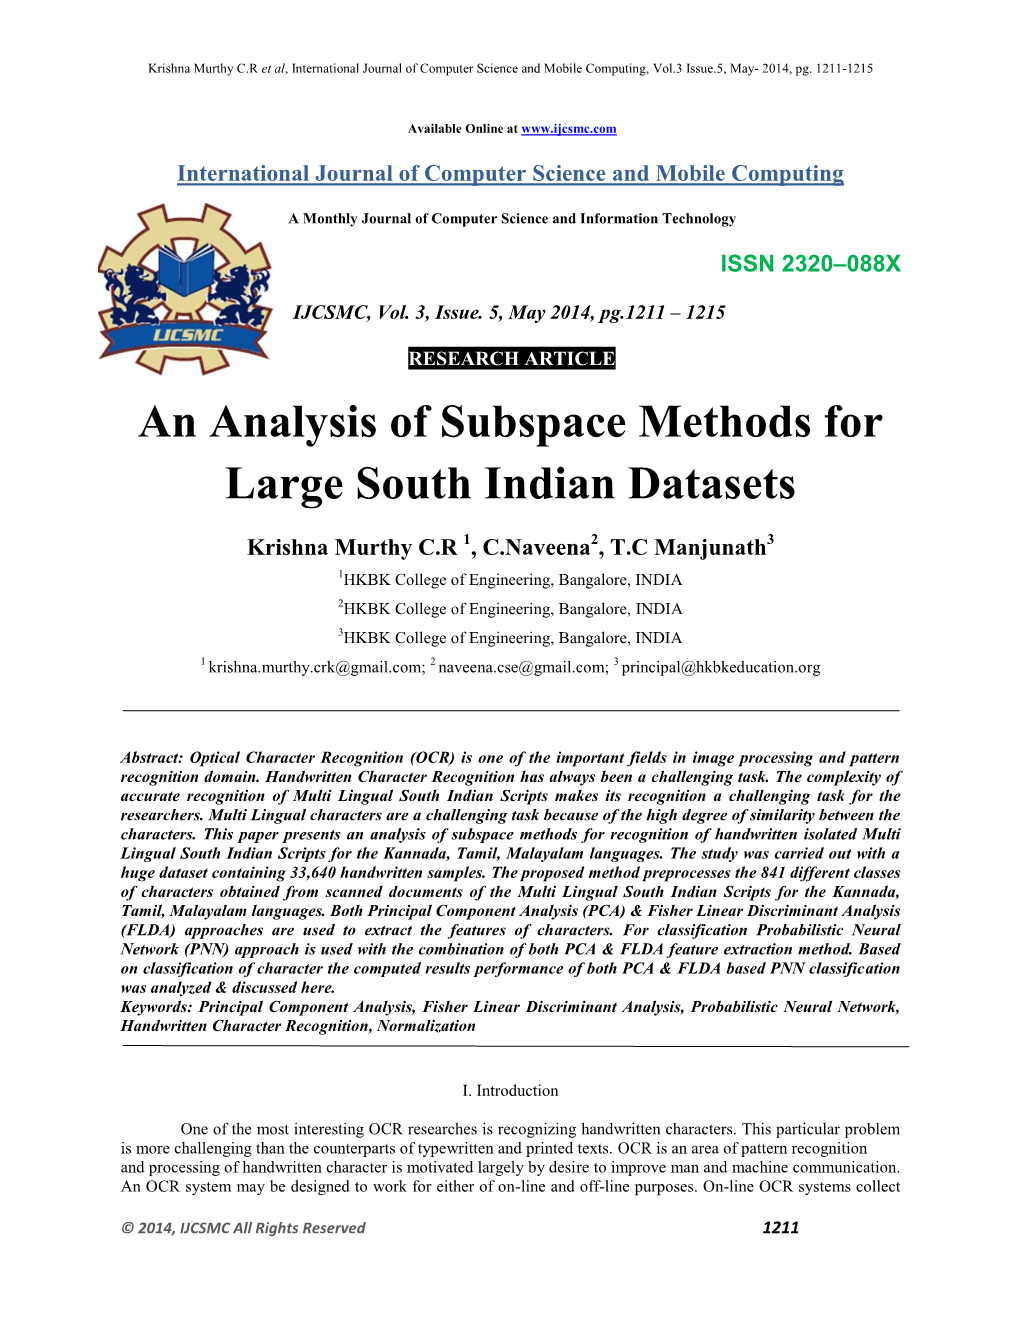 An Analysis of Subspace Methods for Large South Indian Datasets